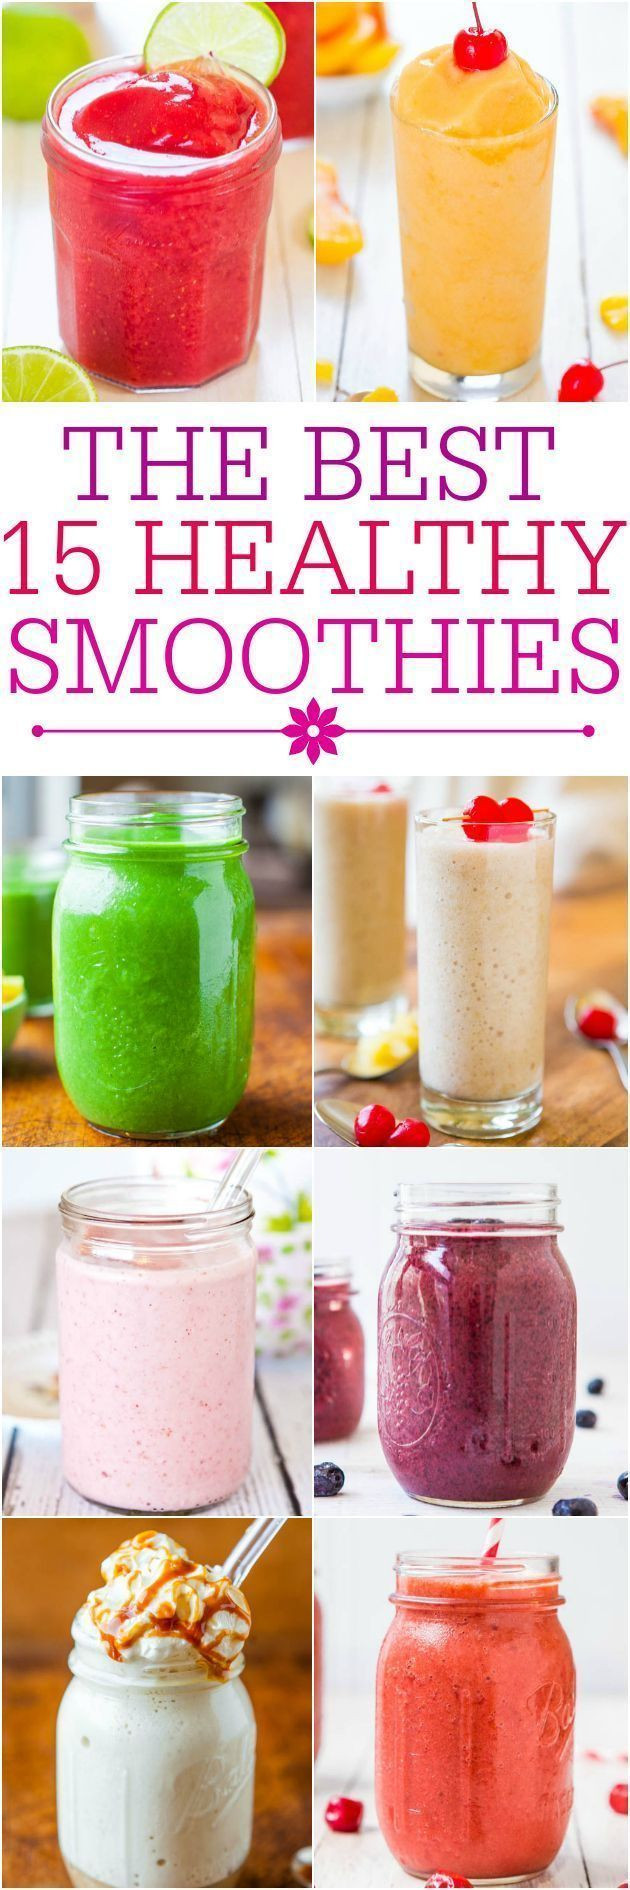 Planet Smoothie Recipes
 Recipe for smoothies ♥ Healthy smoothie drinks The Best 15